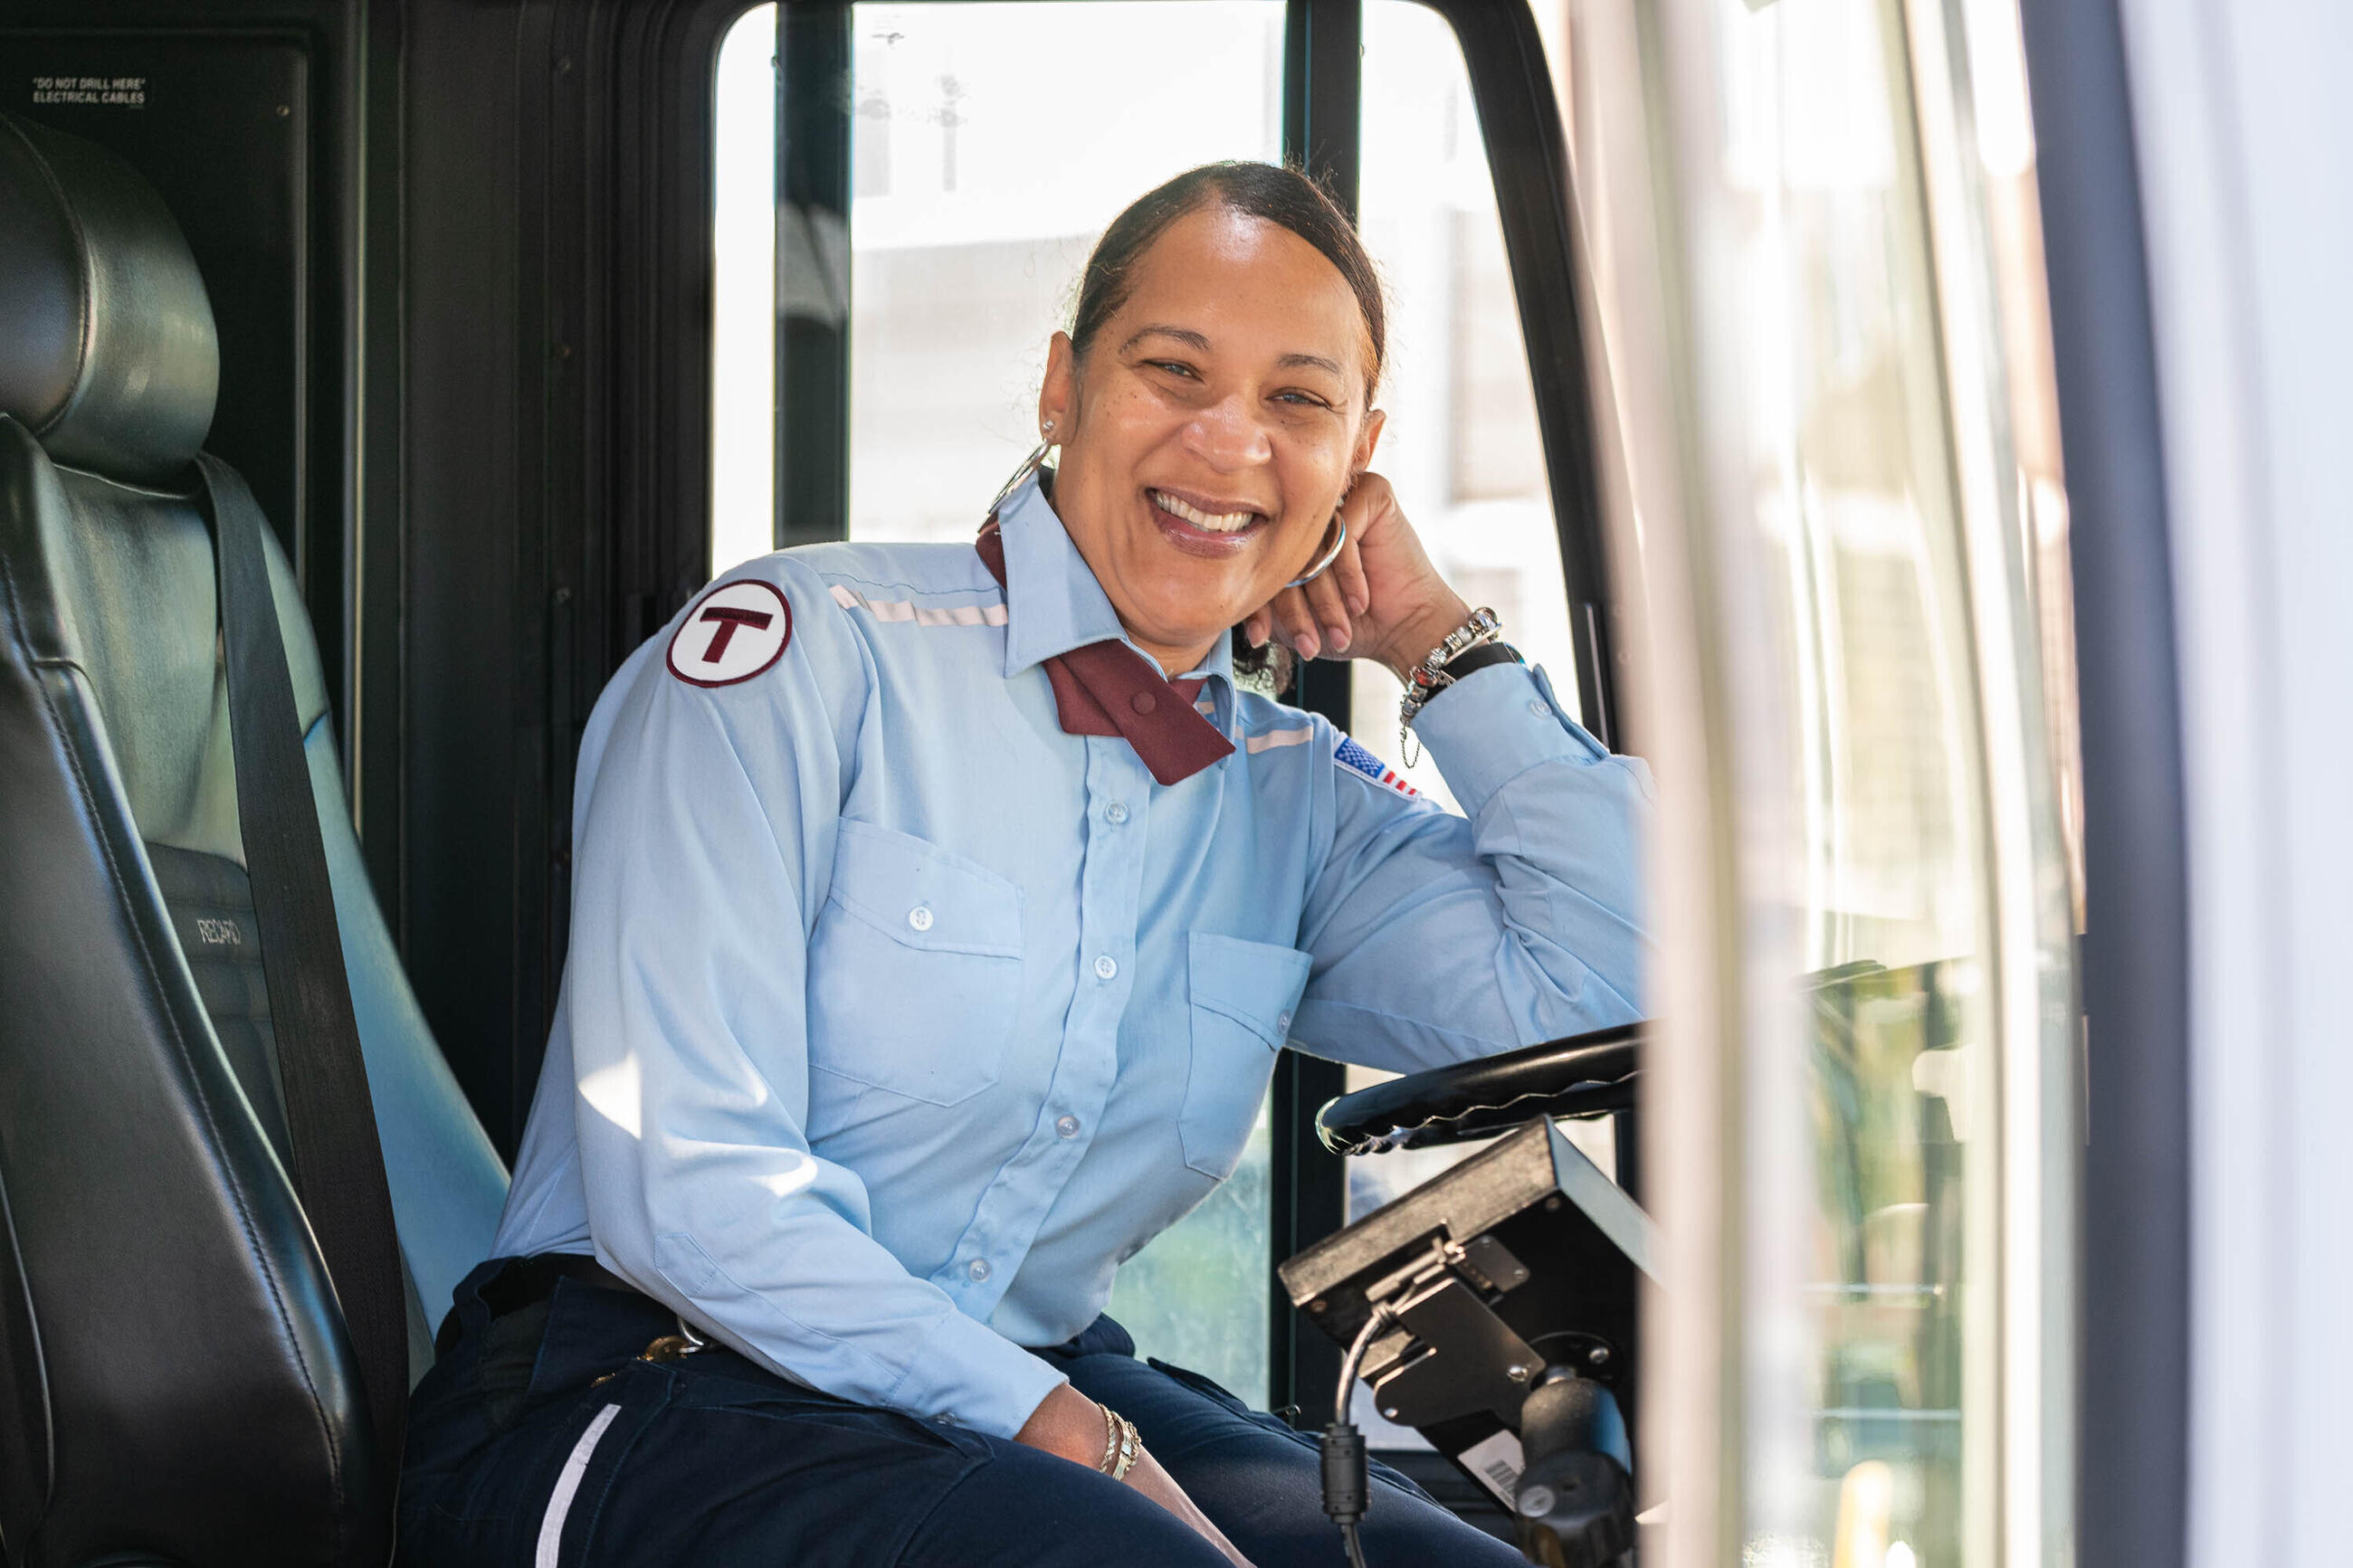 A bus operator in uniform smiling with her elbow resting on the wheel and her hand by her face